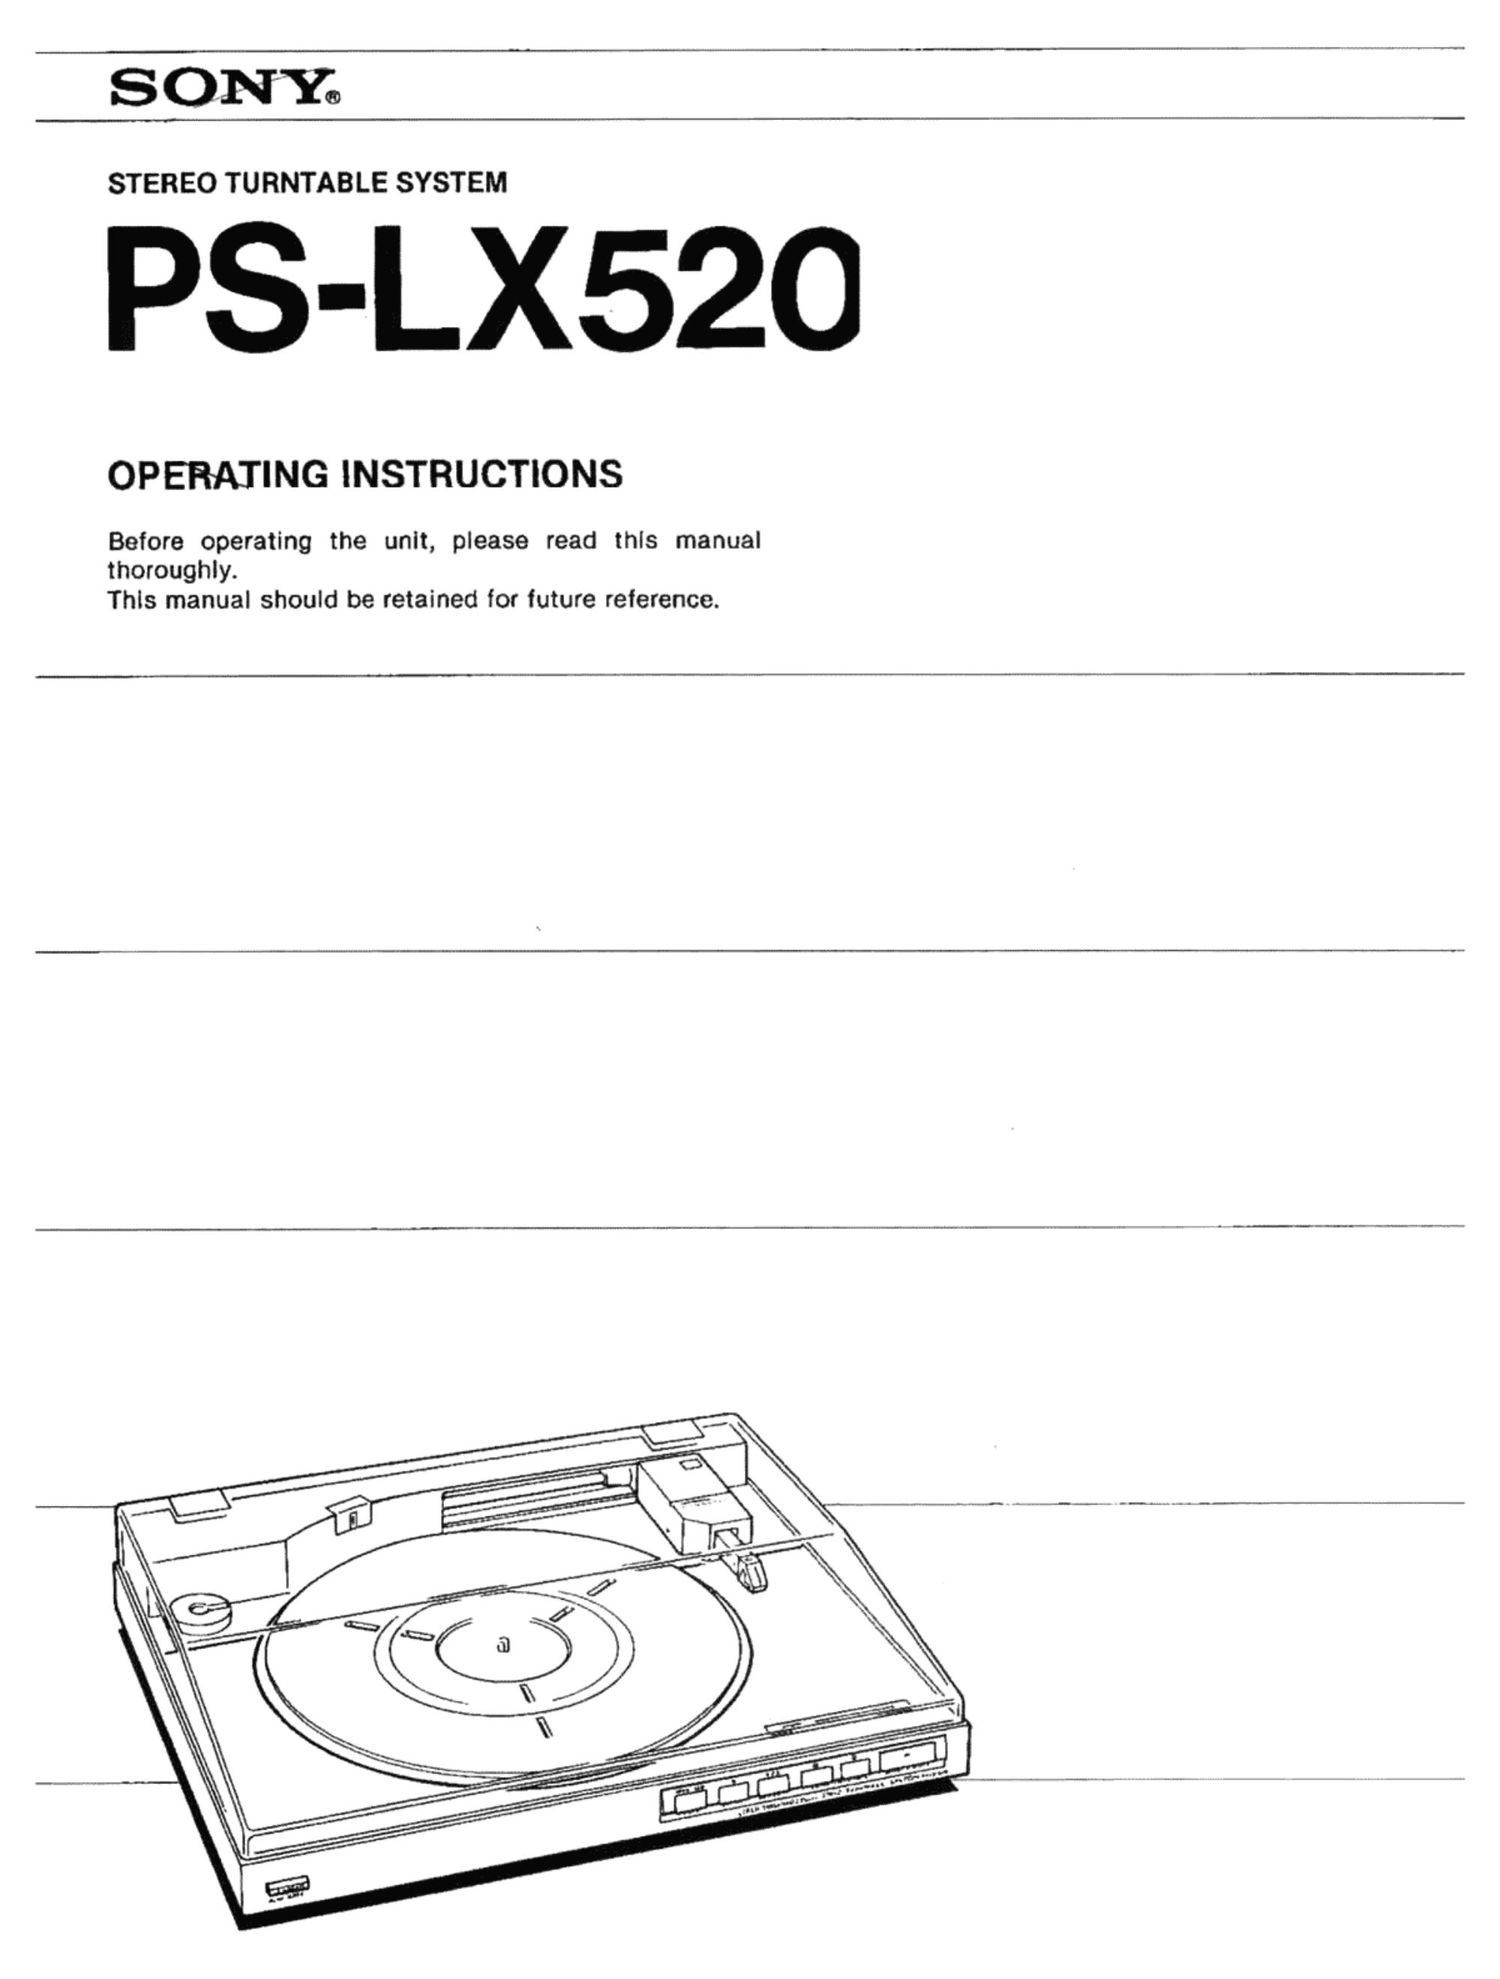 Sony PS LX 520 Owners Manual